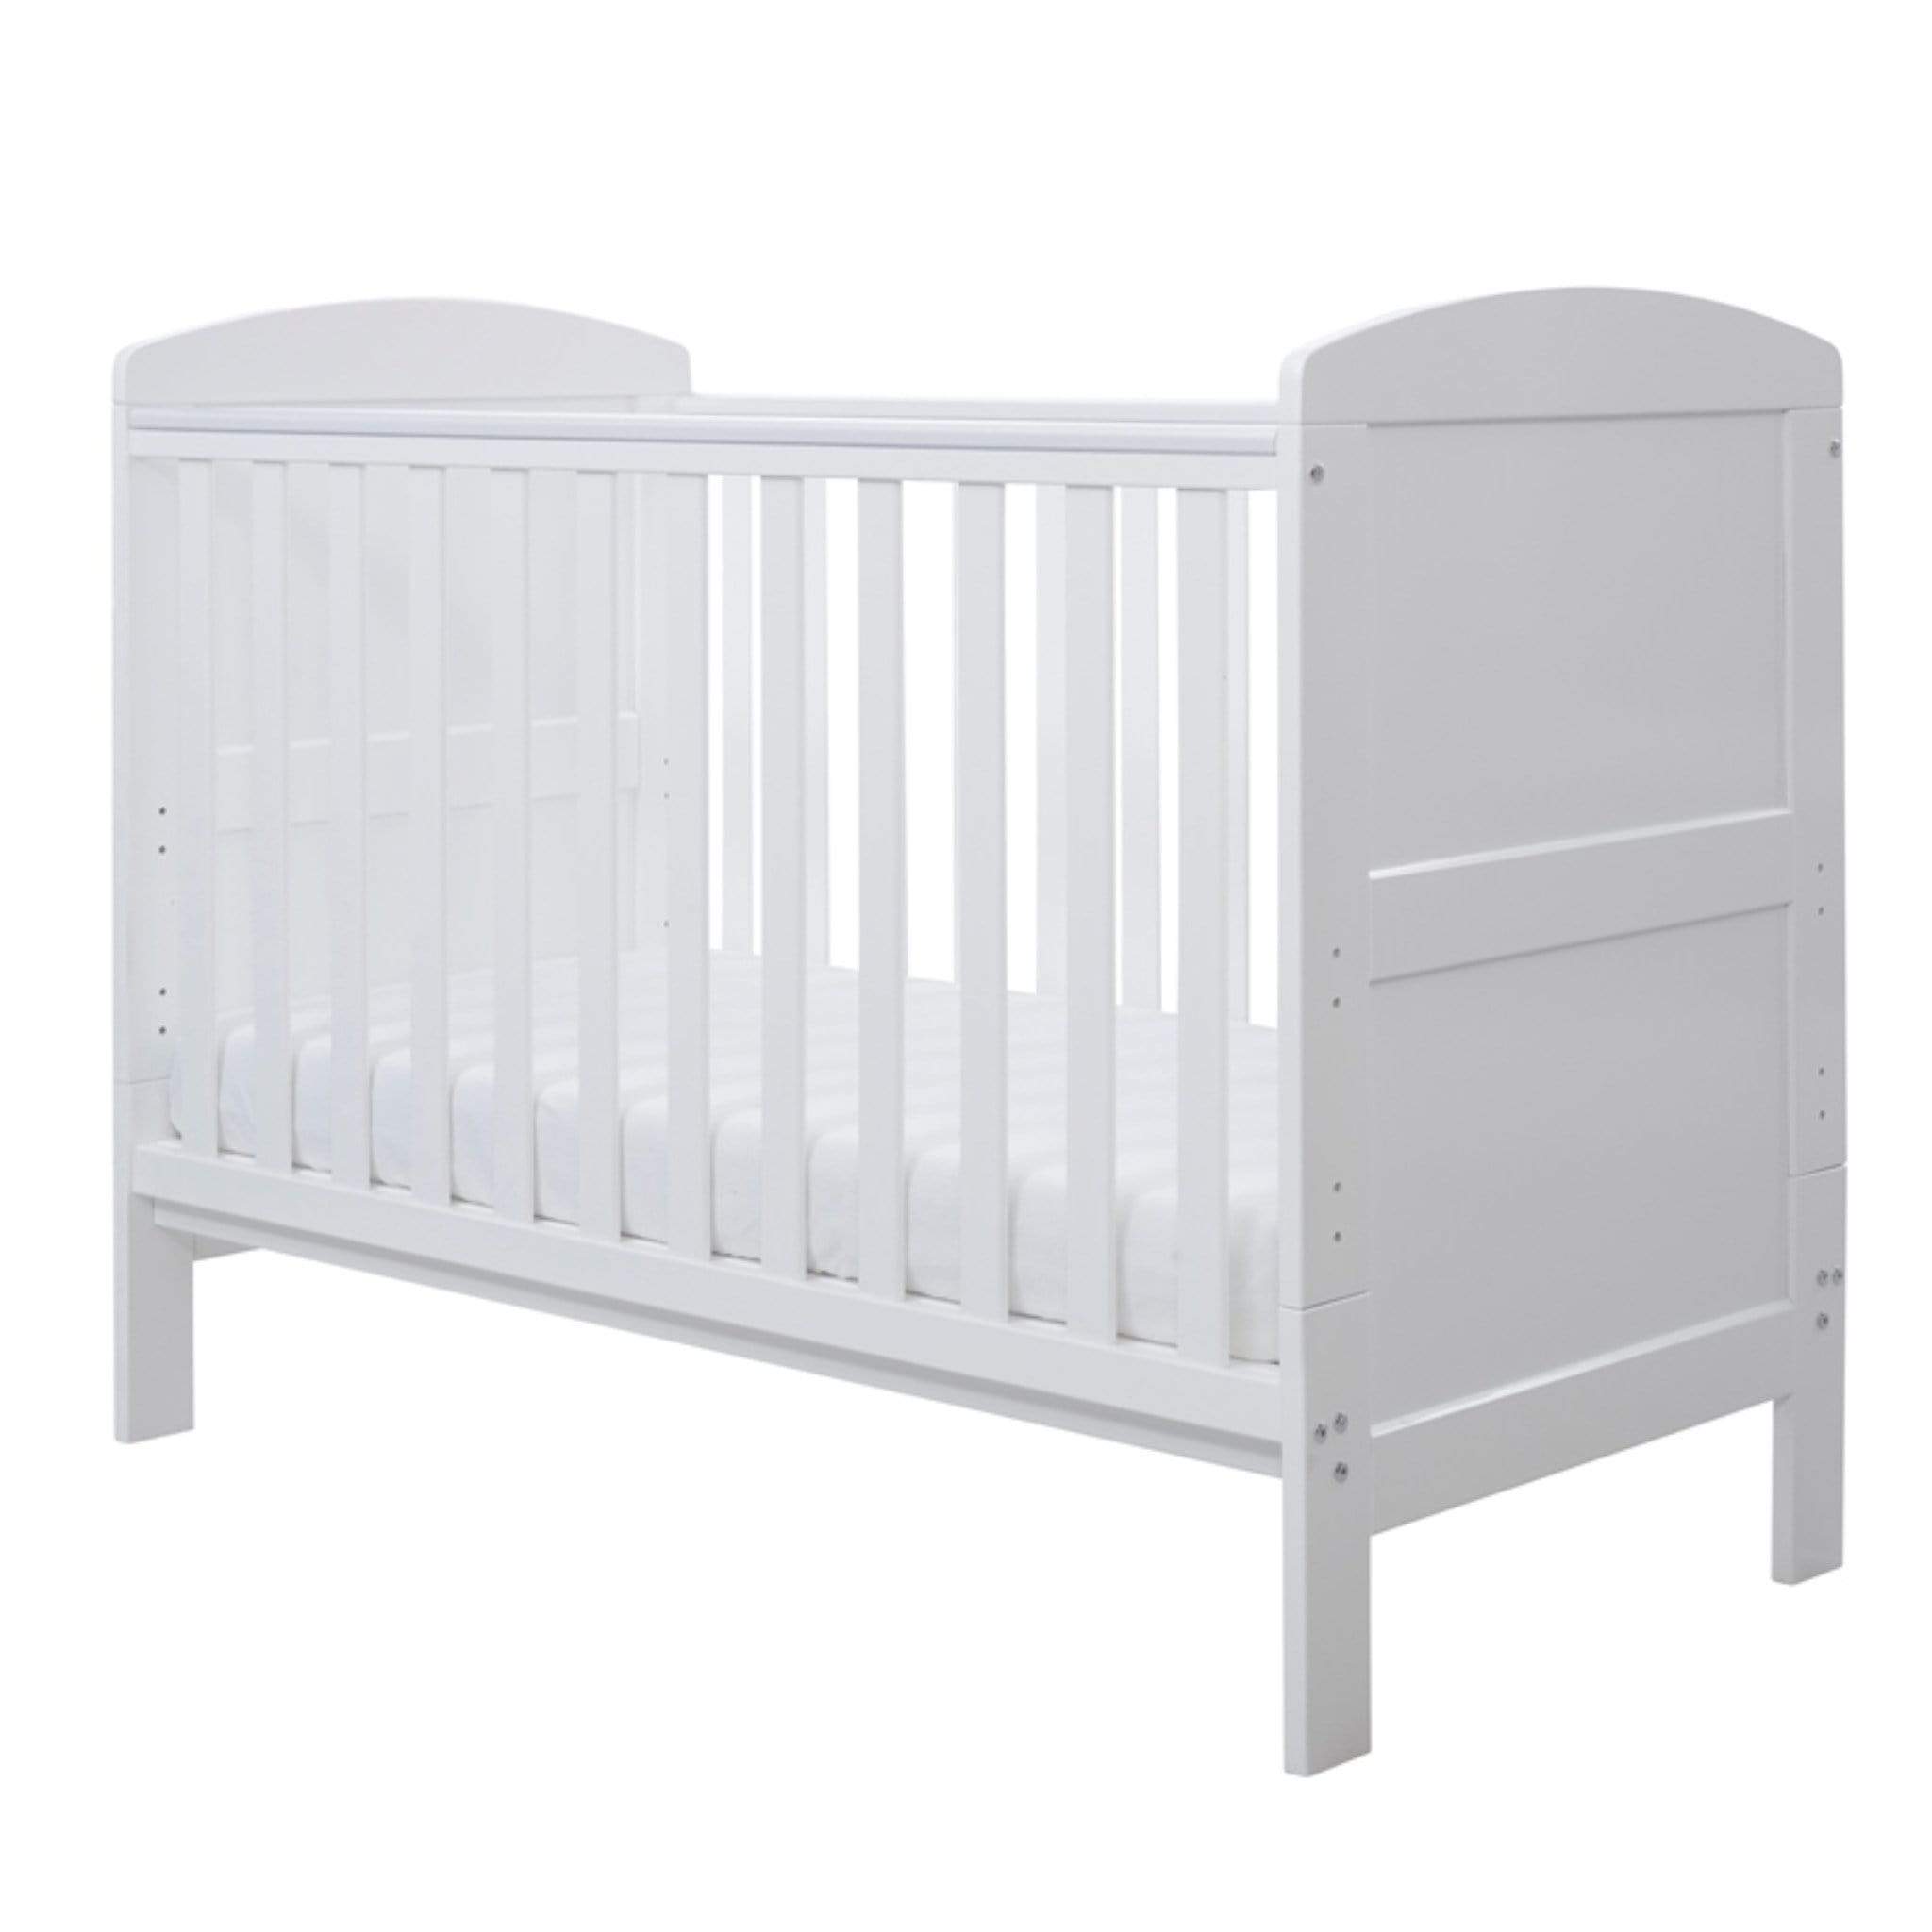 Ickle Bubba Cot Beds Ickle Bubba Coleby Mini Cot Bed White